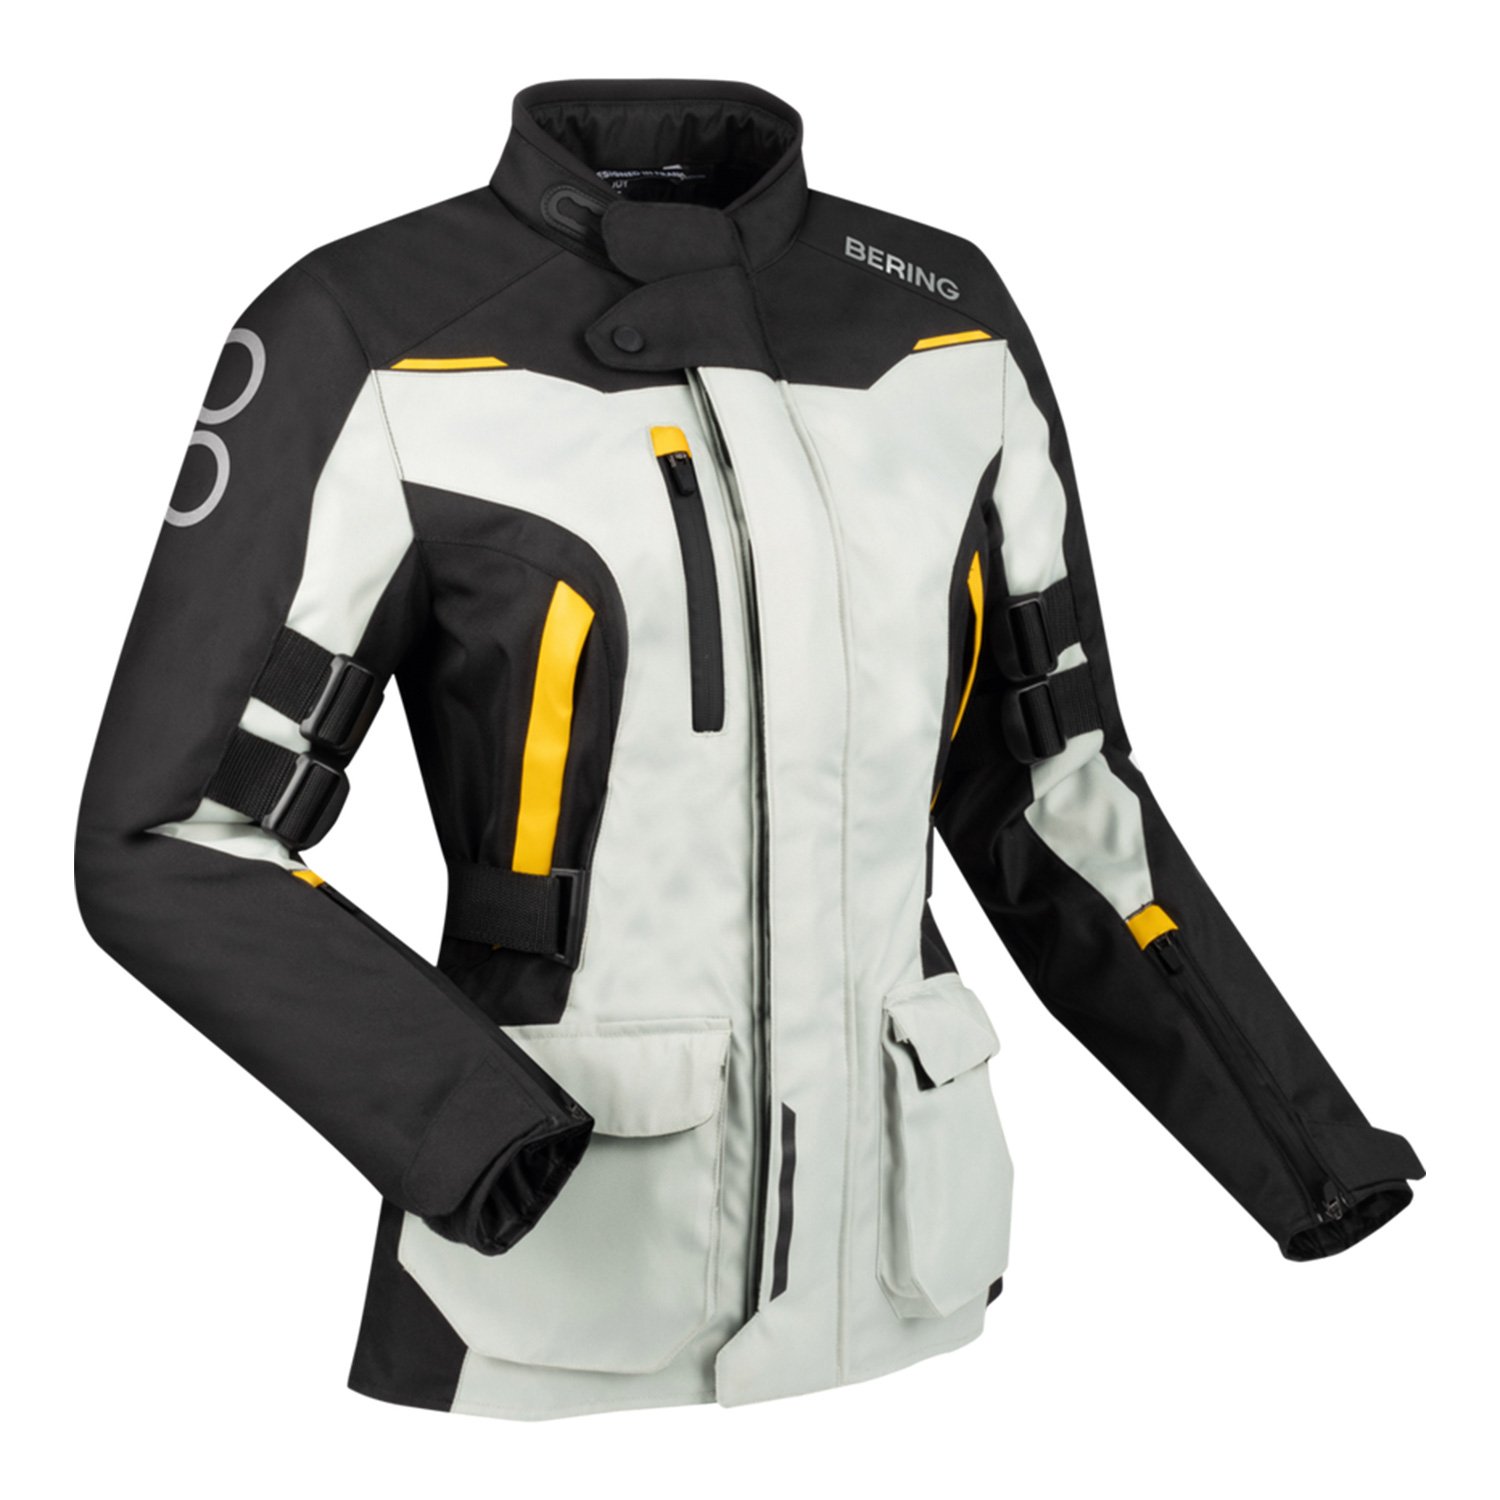 Image of EU Bering Lady Zephyr Jacket Black Grey Yellow Taille T5